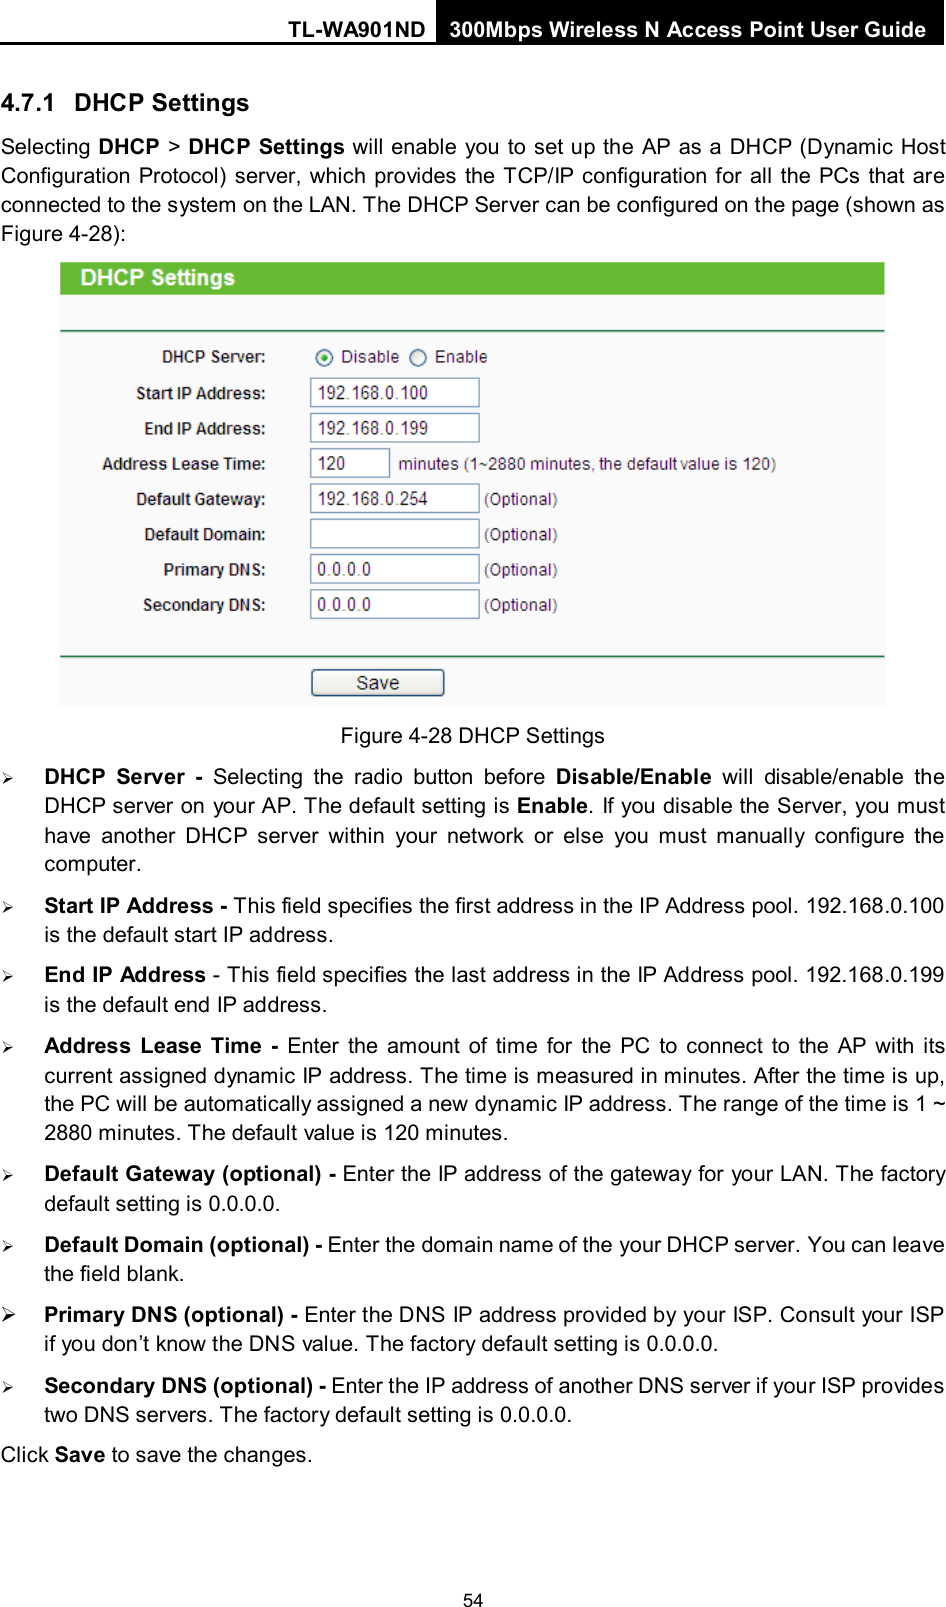 TL-WA901ND 300Mbps Wireless N Access Point User Guide  54 4.7.1 DHCP Settings Selecting DHCP &gt; DHCP Settings will enable you to set up the AP as a DHCP (Dynamic Host Configuration Protocol) server, which provides the TCP/IP configuration for all the PCs that are connected to the system on the LAN. The DHCP Server can be configured on the page (shown as Figure 4-28):  Figure 4-28 DHCP Settings  DHCP Server  -  Selecting the radio button before Disable/Enable will disable/enable the DHCP server on your AP. The default setting is Enable. If you disable the Server, you must have another DHCP server within your network or else you must manually configure the computer.  Start IP Address - This field specifies the first address in the IP Address pool. 192.168.0.100 is the default start IP address.    End IP Address - This field specifies the last address in the IP Address pool. 192.168.0.199 is the default end IP address.    Address Lease Time -  Enter the amount of time for the PC to connect to the AP with its current assigned dynamic IP address. The time is measured in minutes. After the time is up, the PC will be automatically assigned a new dynamic IP address. The range of the time is 1 ~ 2880 minutes. The default value is 120 minutes.  Default Gateway (optional) - Enter the IP address of the gateway for your LAN. The factory default setting is 0.0.0.0.  Default Domain (optional) - Enter the domain name of the your DHCP server. You can leave the field blank.  Primary DNS (optional) - Enter the DNS IP address provided by your ISP. Consult your ISP if you don’t know the DNS value. The factory default setting is 0.0.0.0.  Secondary DNS (optional) - Enter the IP address of another DNS server if your ISP provides two DNS servers. The factory default setting is 0.0.0.0. Click Save to save the changes. 